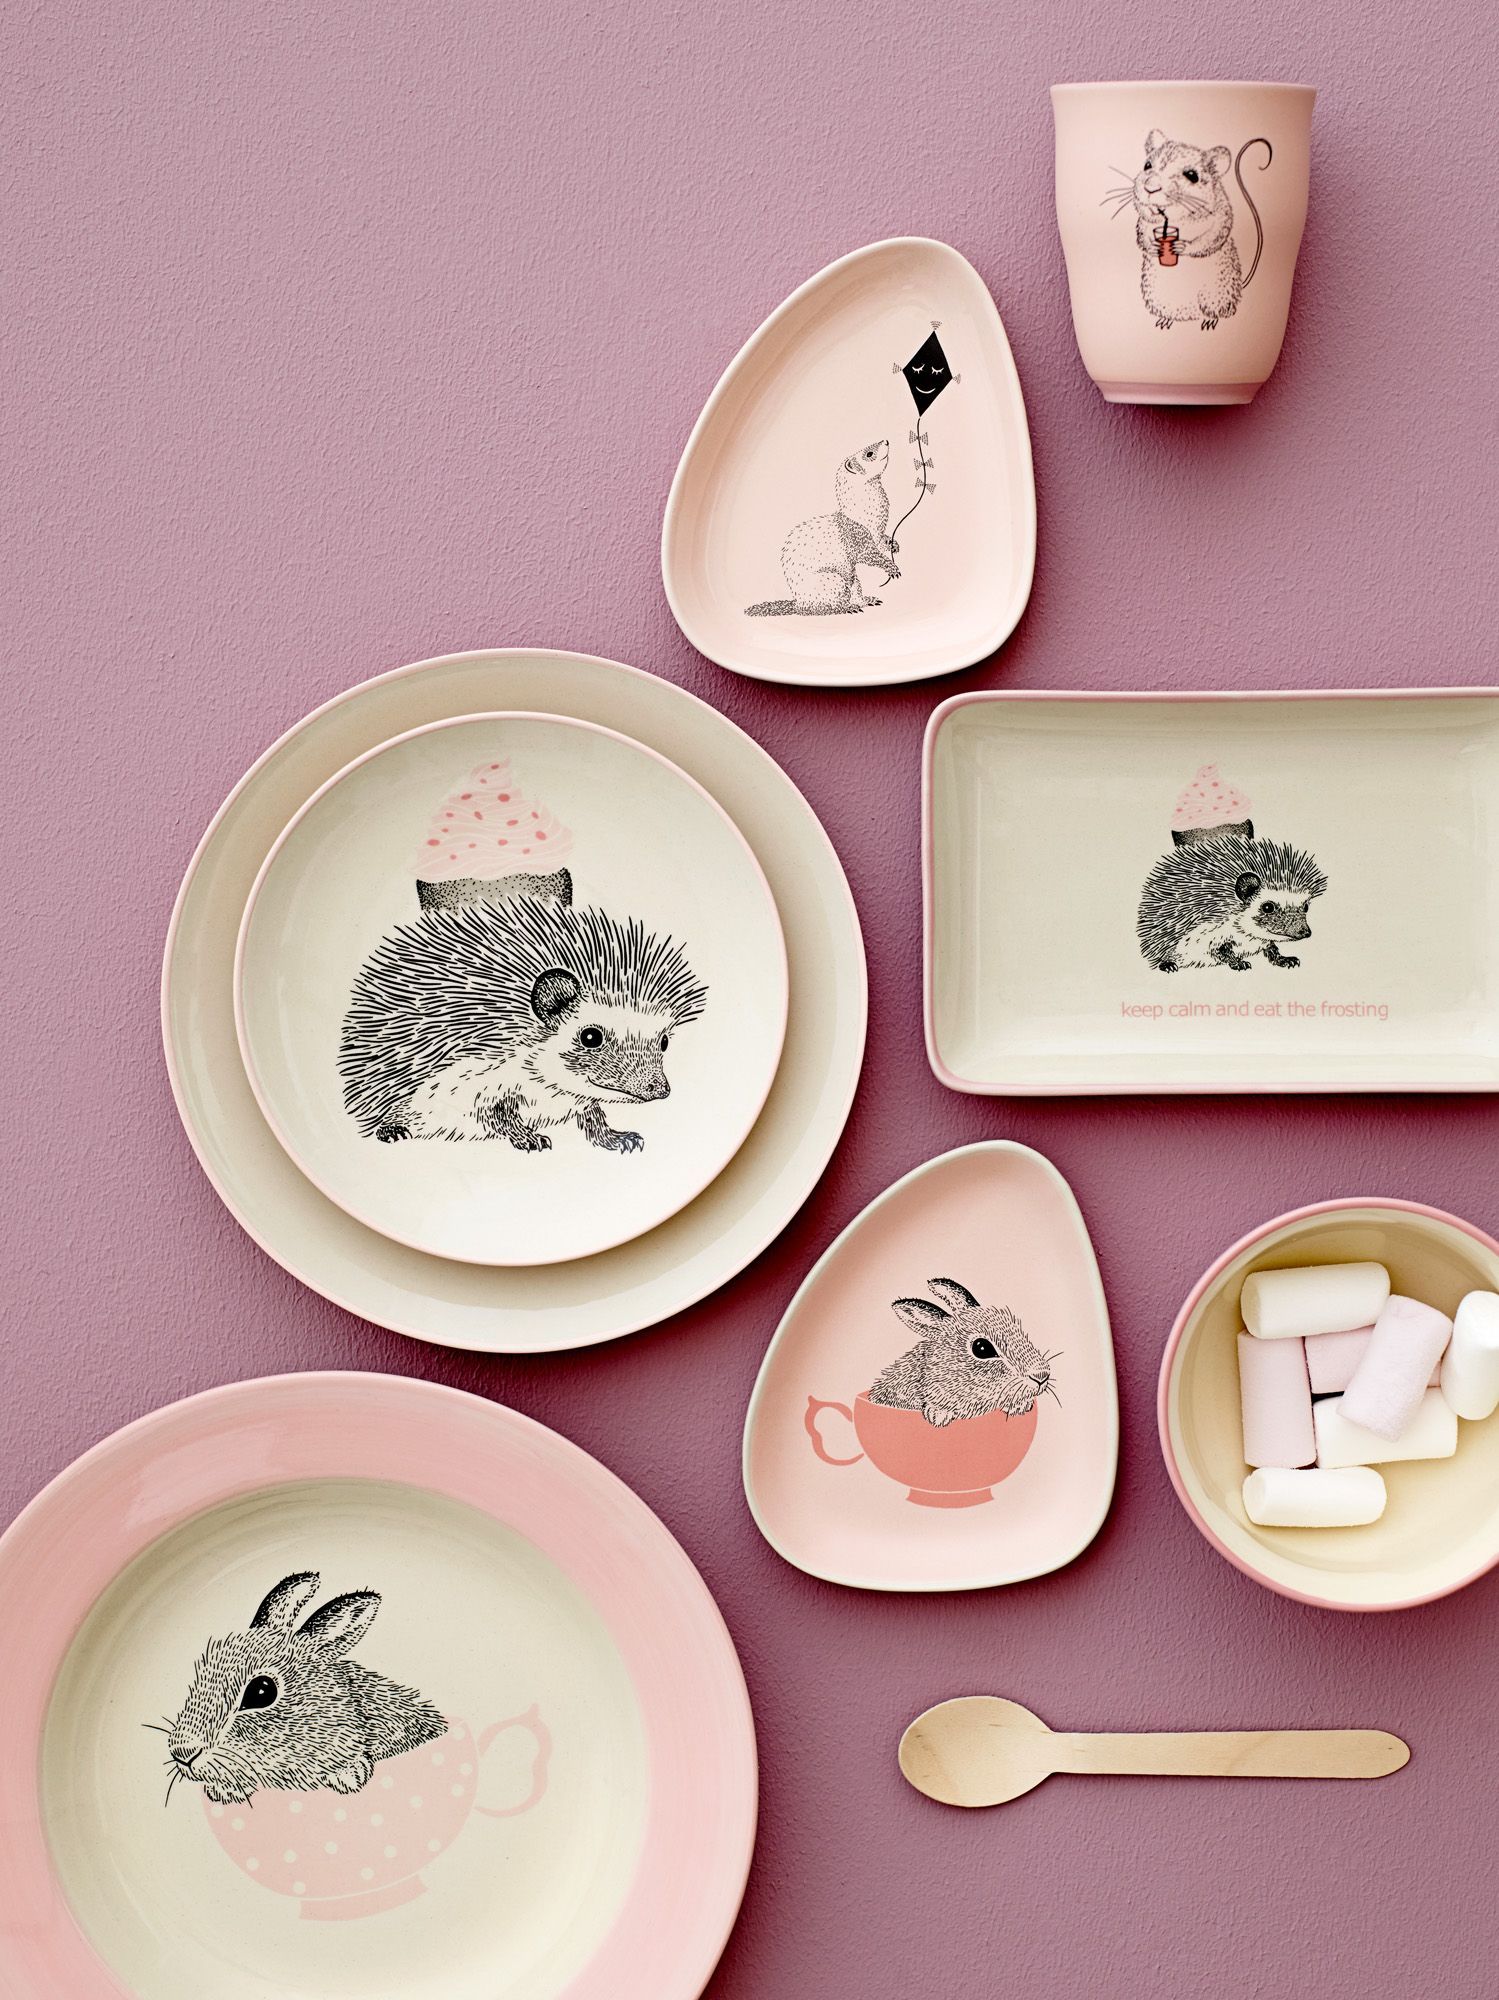 This wonderful tableware for the little ones is called Nanna – by Bloomingville Mini